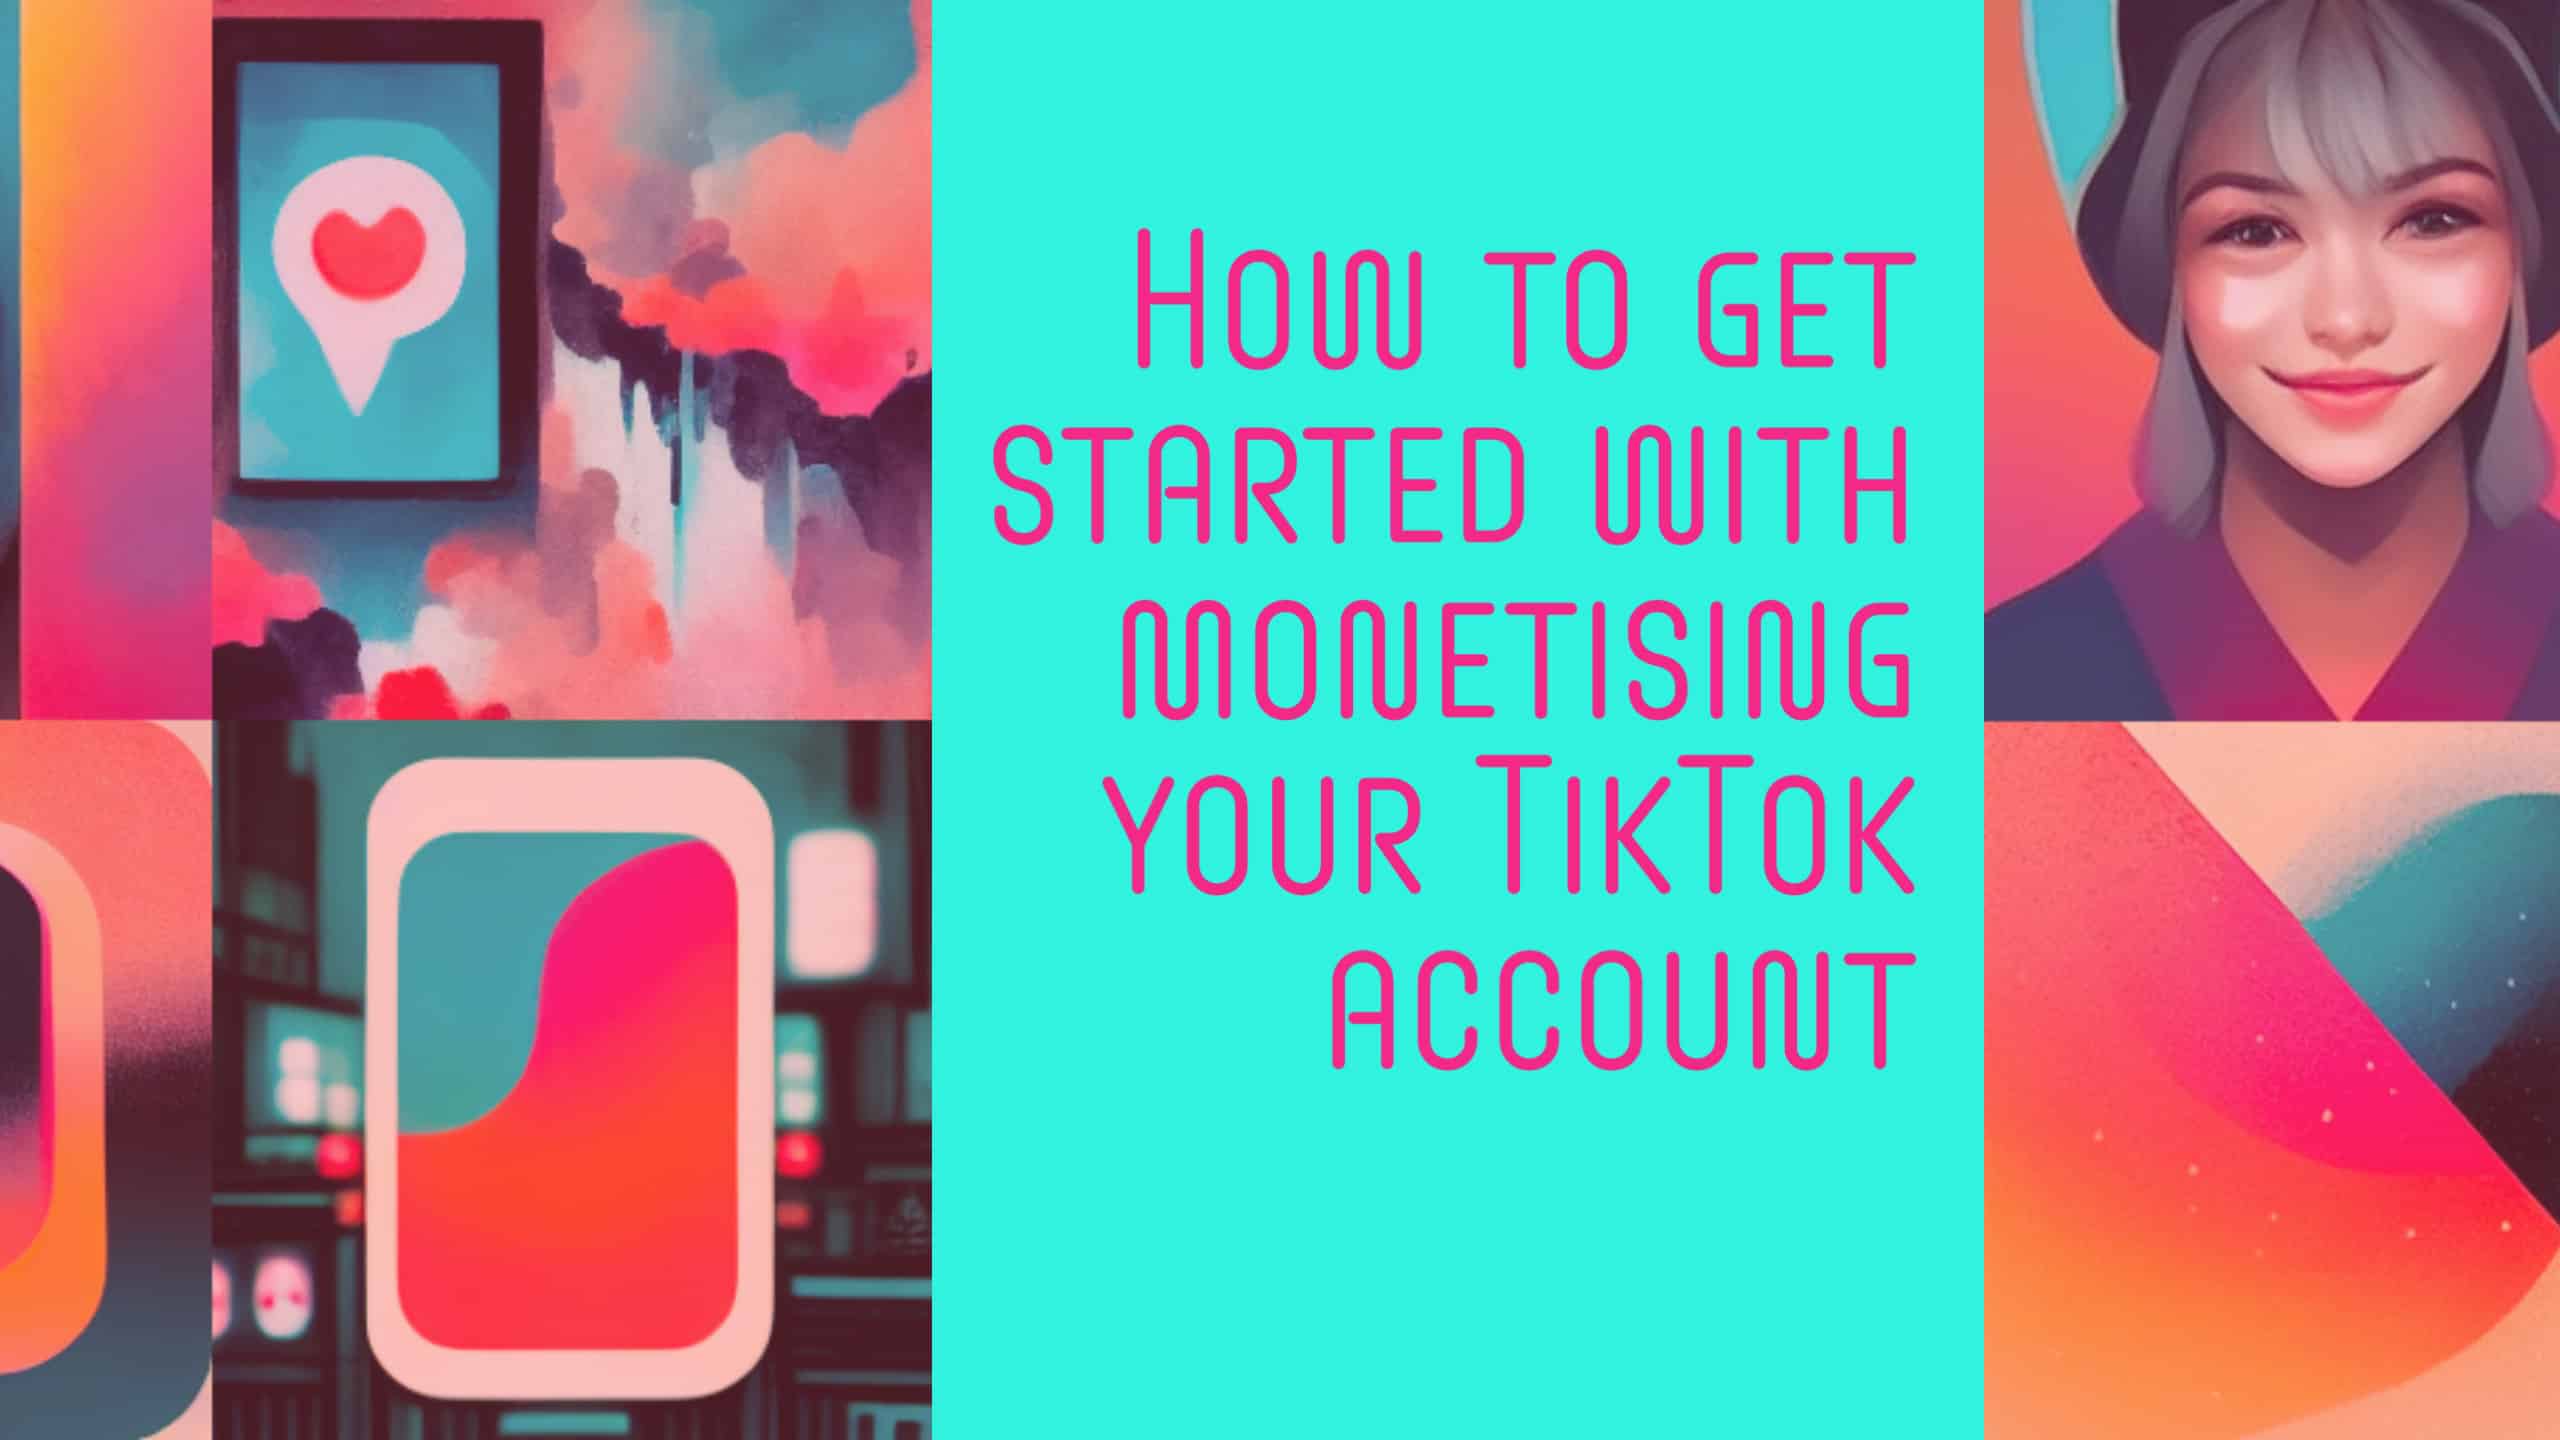 How to get started with monetising your TikTok account